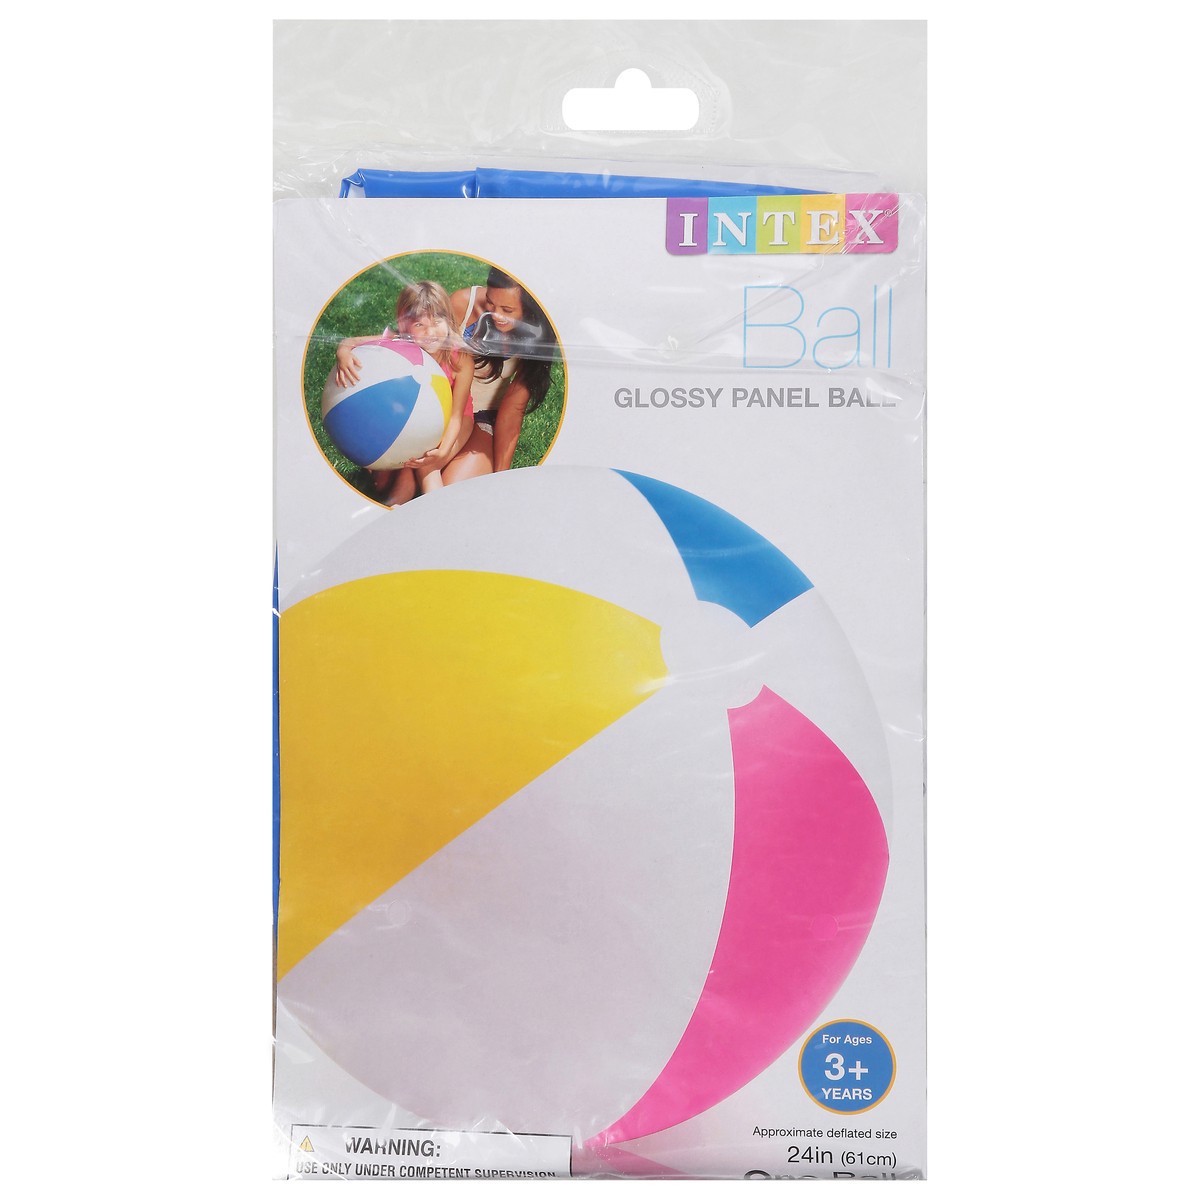 slide 1 of 9, Intex Glossy Panel Ball for Ages 3+ Years 1 ea, 1 ct